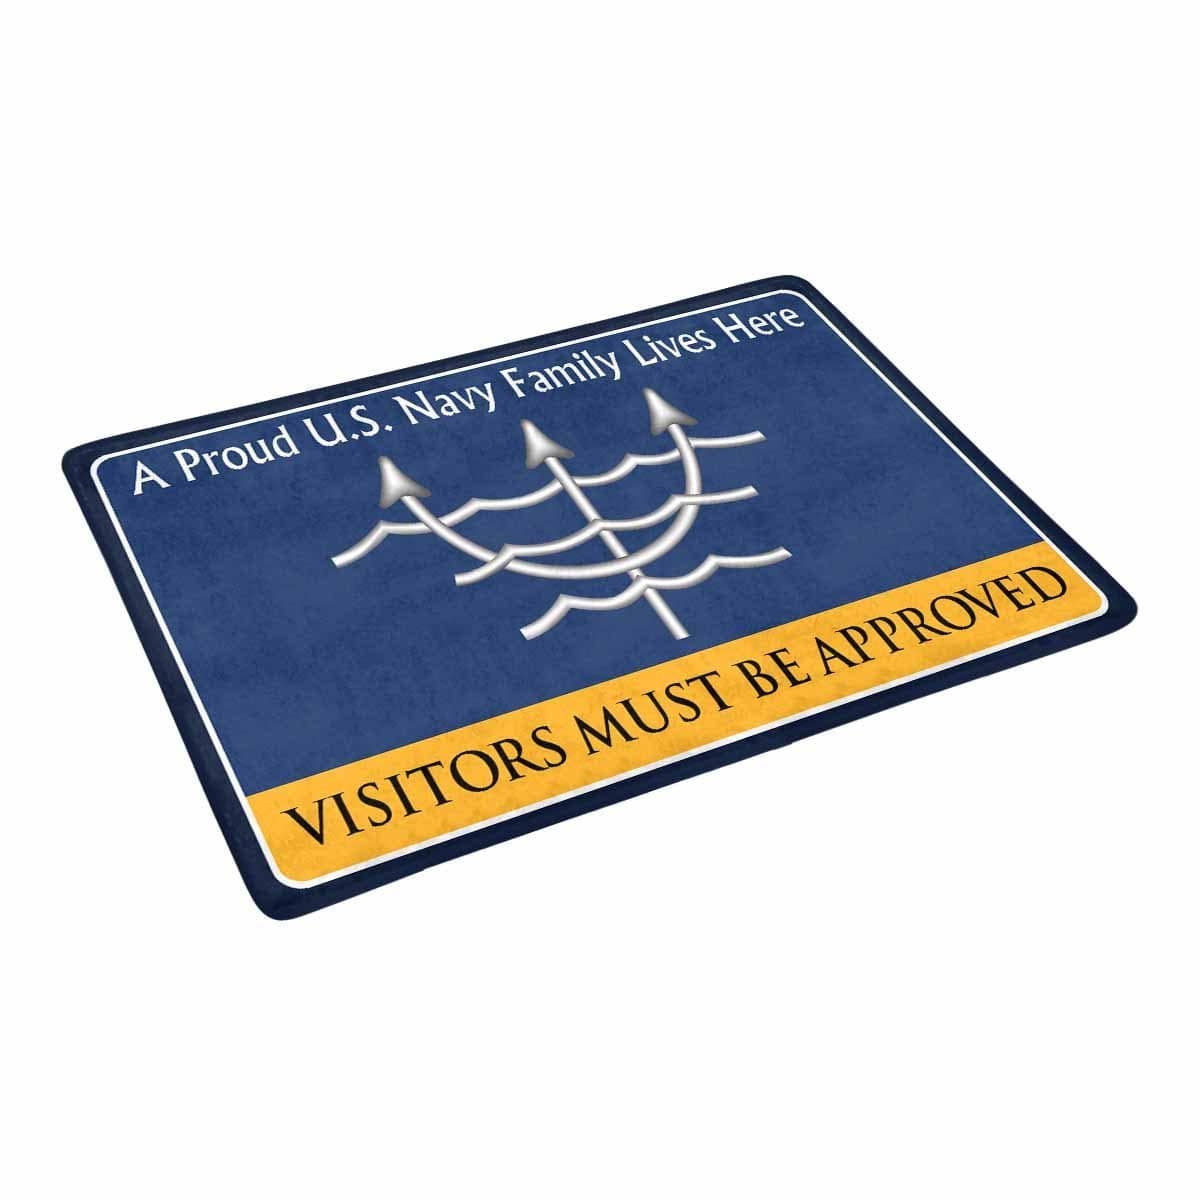 Navy Ocean Systems Technician Navy OT Family Doormat - Visitors must be approved (23,6 inches x 15,7 inches)-Doormat-Navy-Rate-Veterans Nation